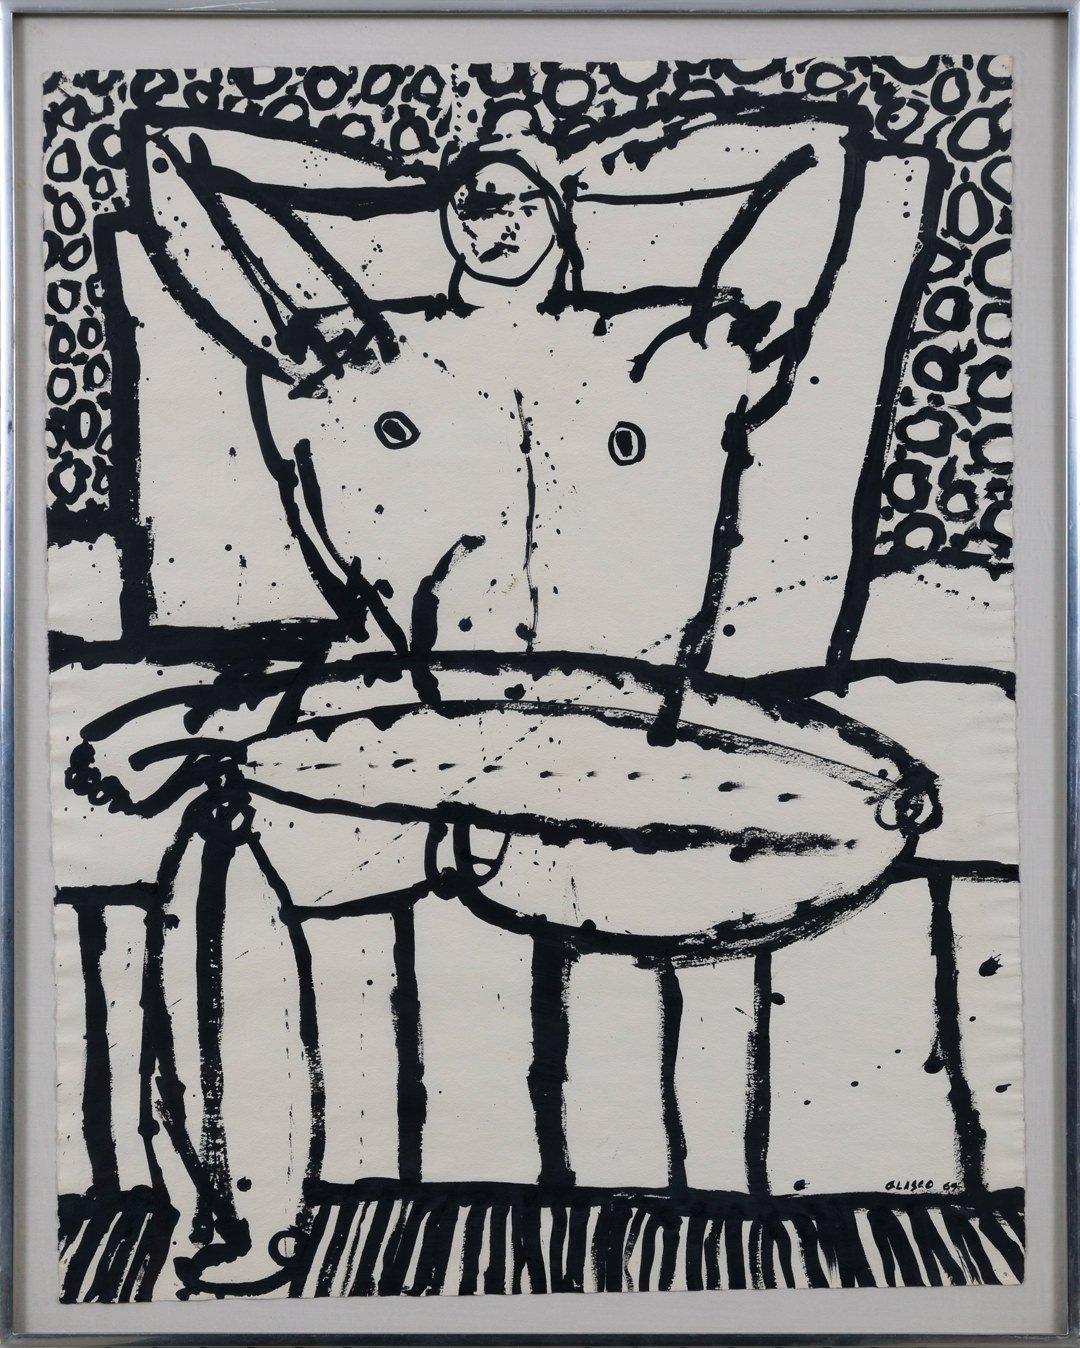 Seated Male, Mid-Century Male Nude Figurative Expressionist Drawing on Paper - Painting by Joseph Glasco